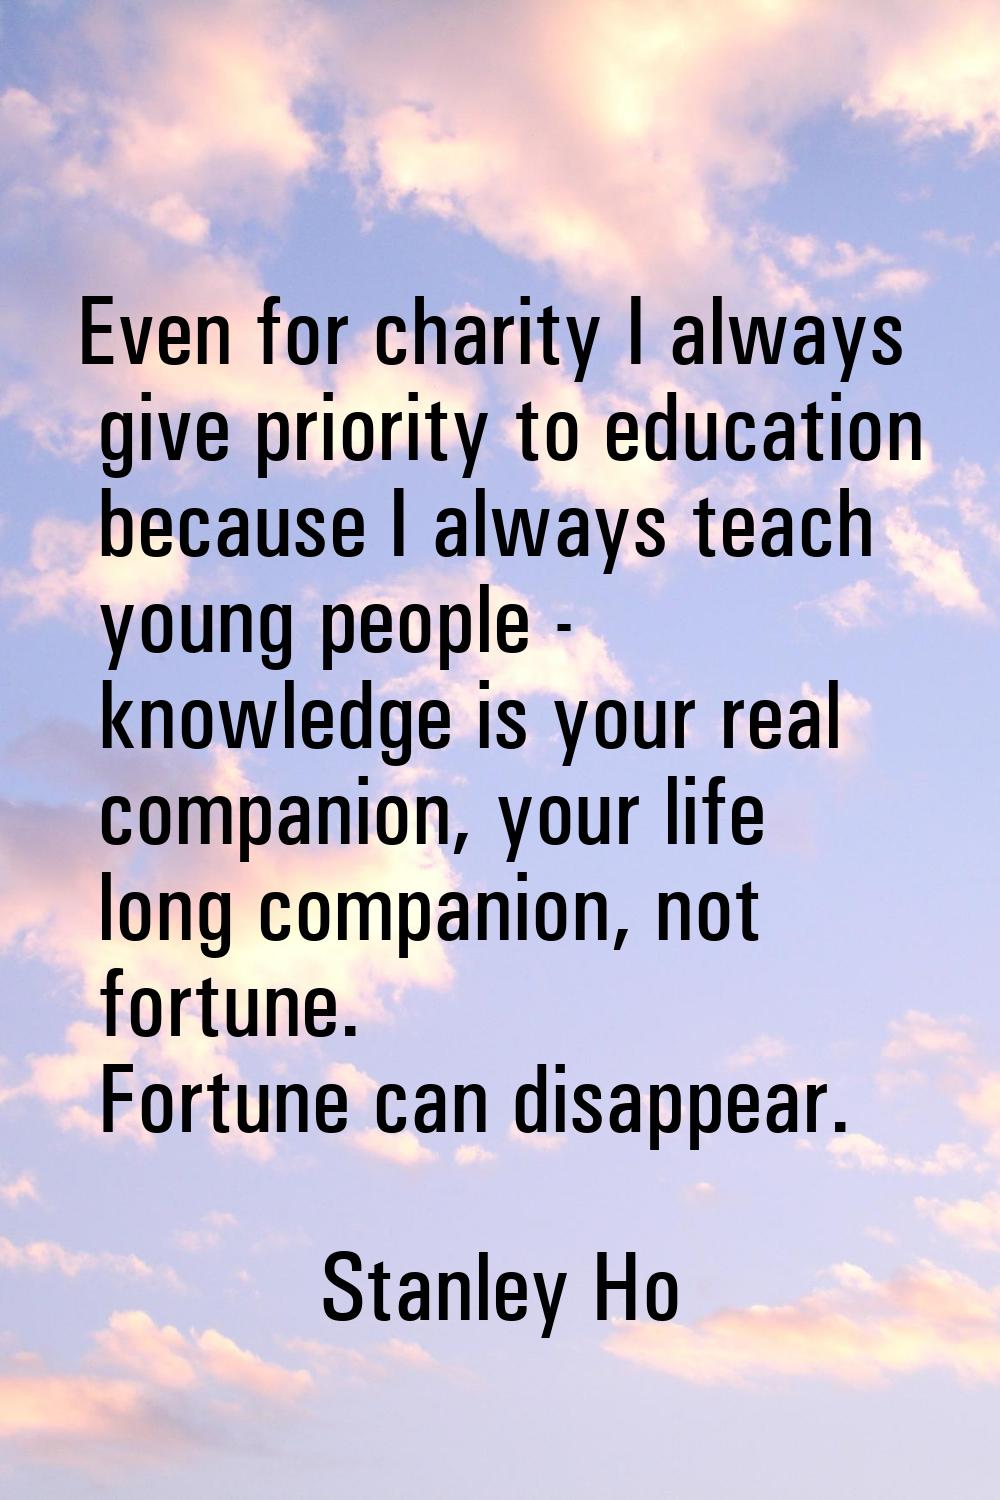 Even for charity I always give priority to education because I always teach young people - knowledg